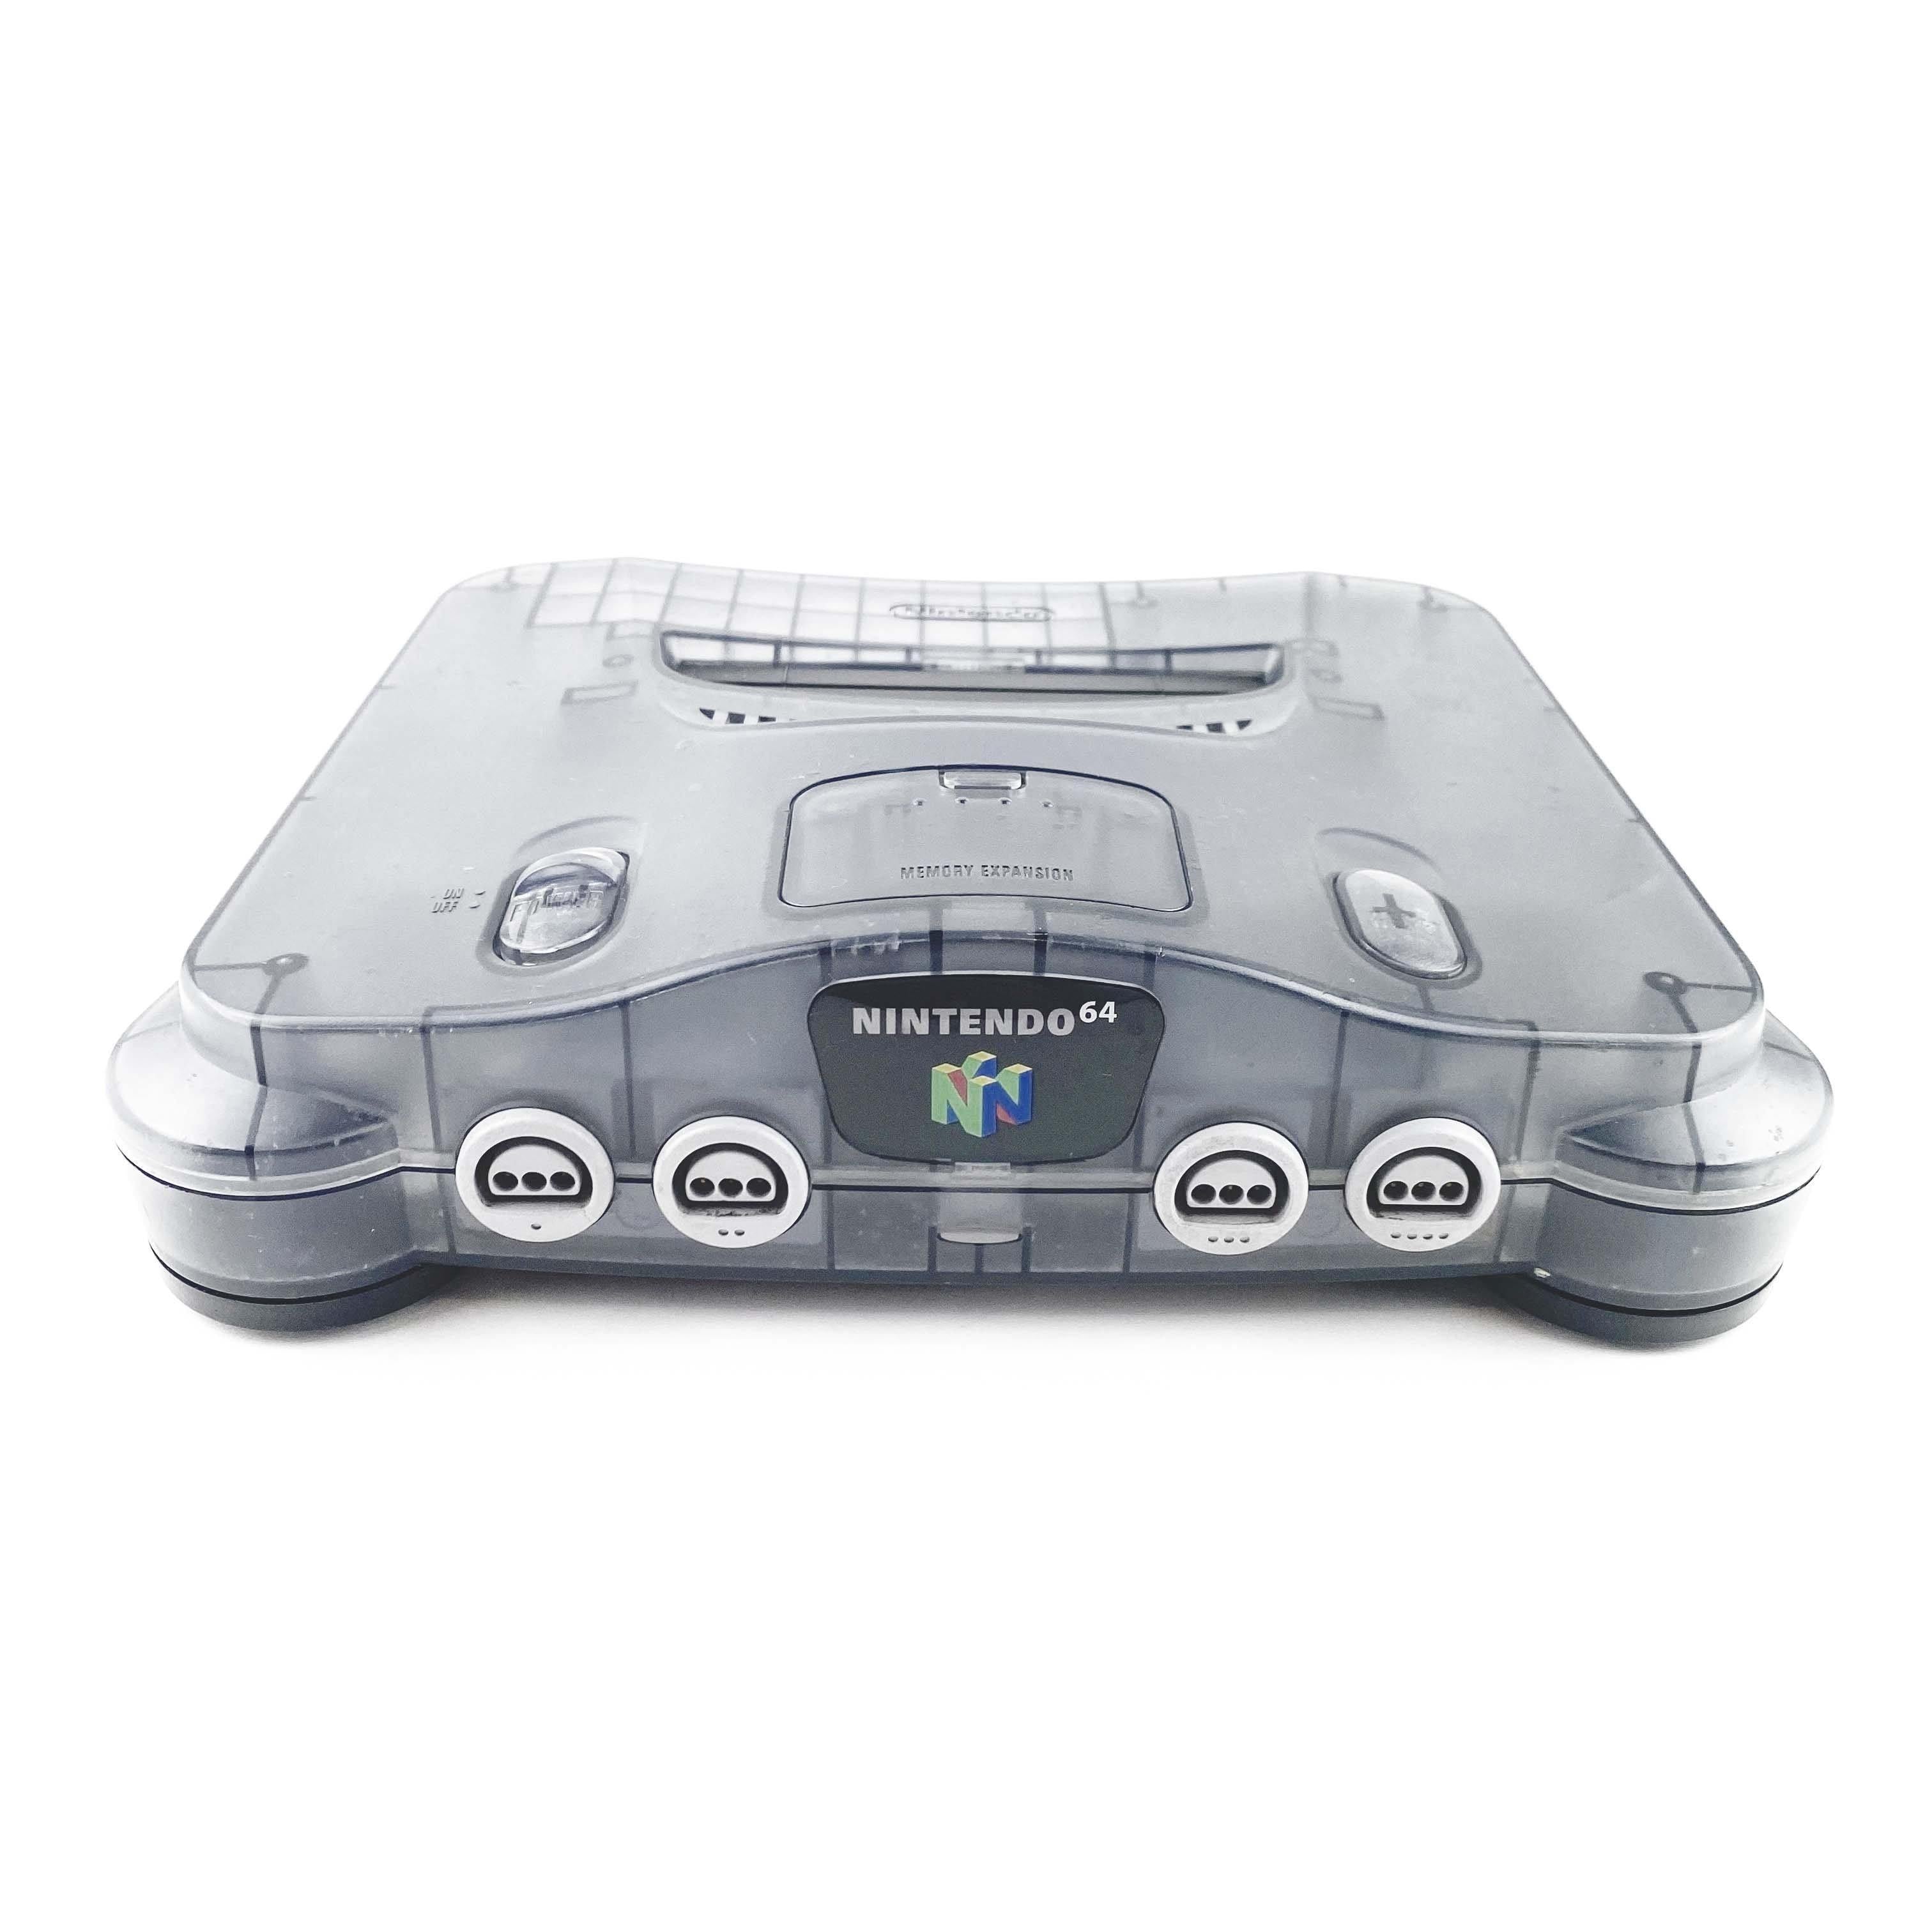 Nintendo N64 Clear Smoke Console Only (NUS-001)